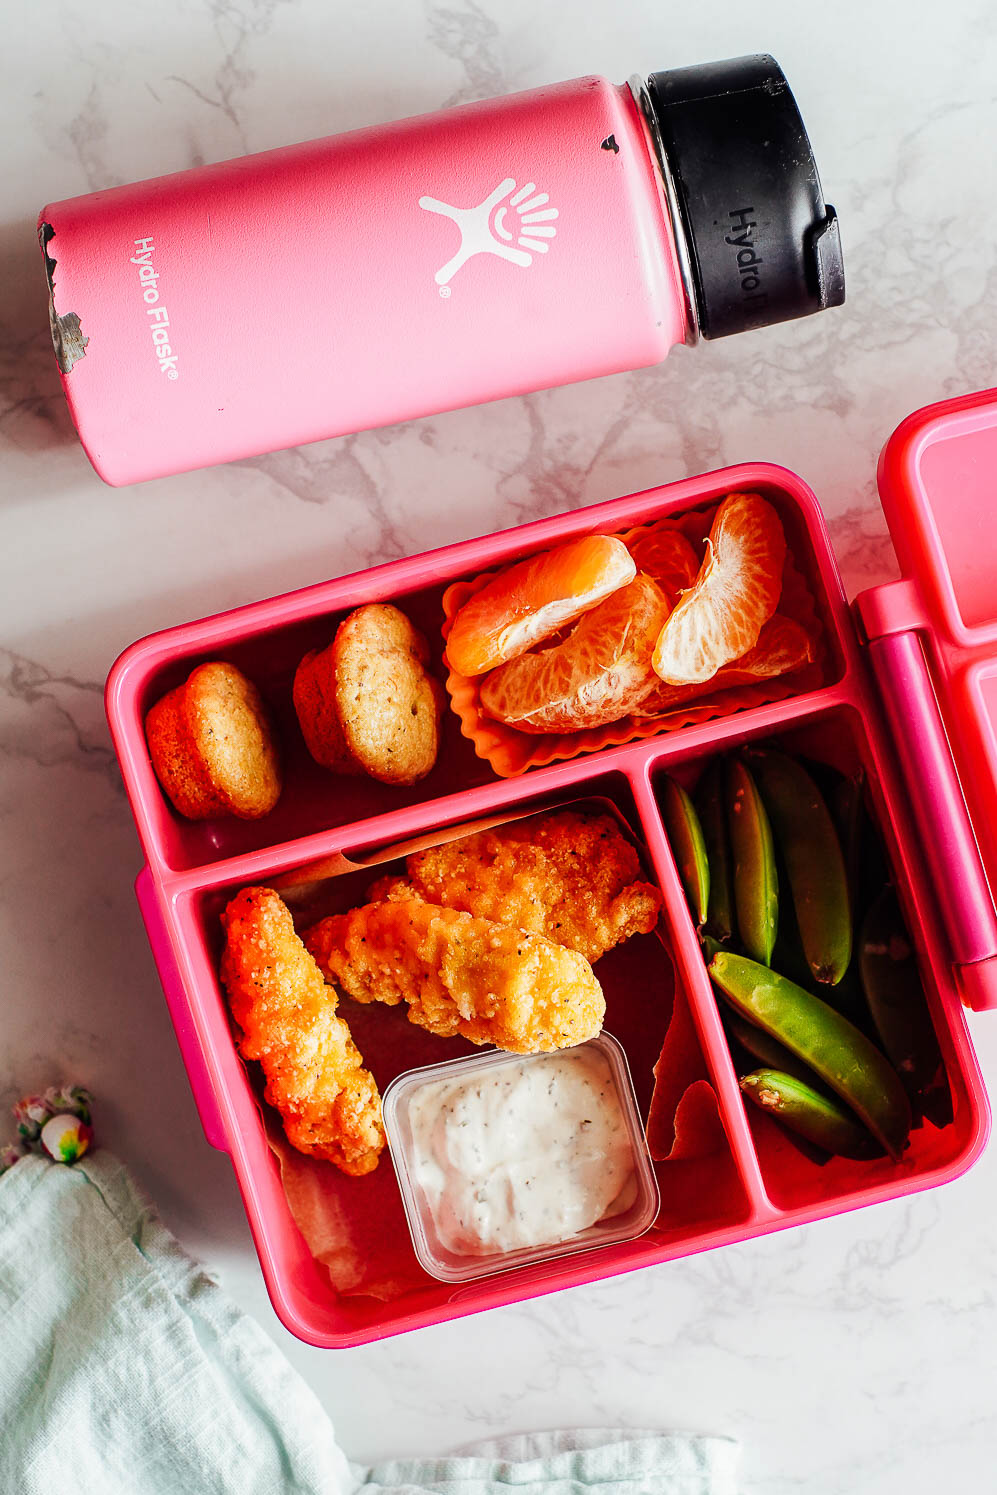 Chicken nuggets, mini muffins, sugar snap peas, orange slices, and ranch dip in a lunchbox.